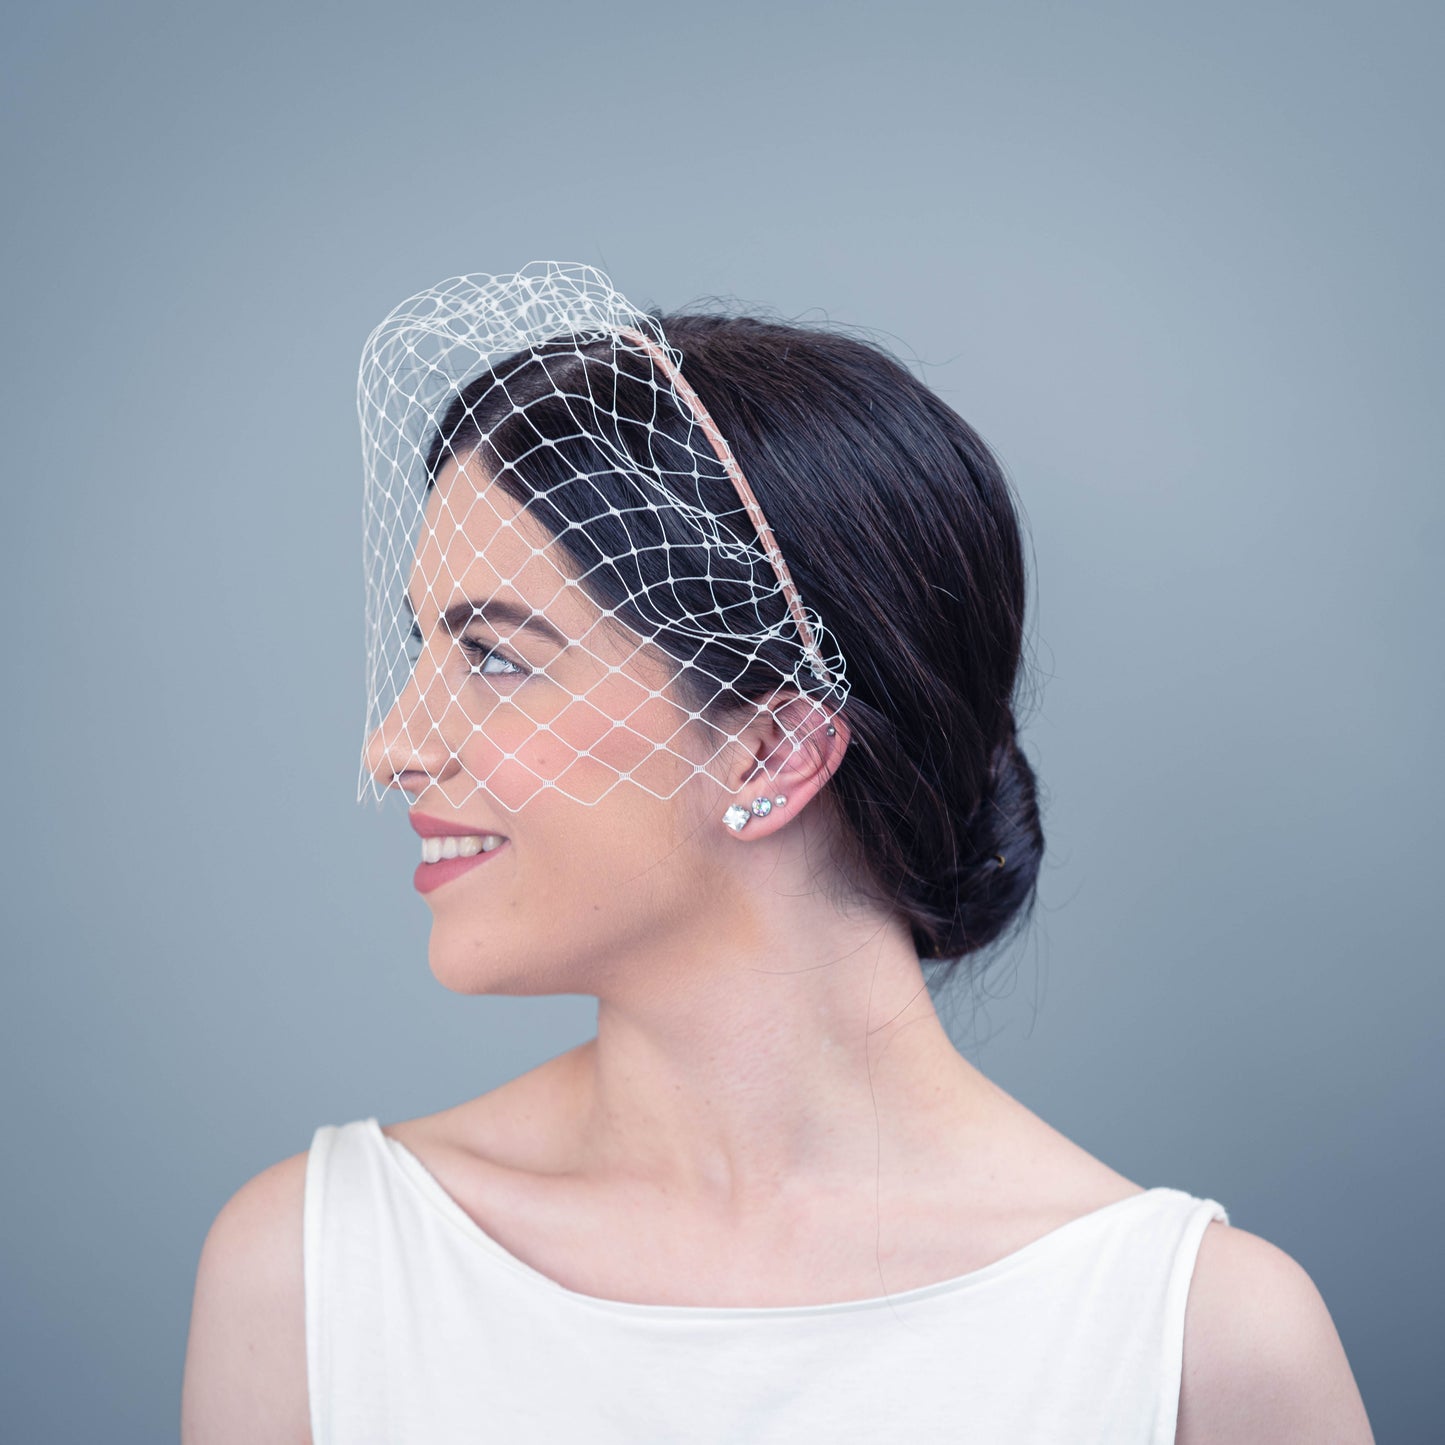 All of Me bridal birdcage veil on headband in ivory veiling